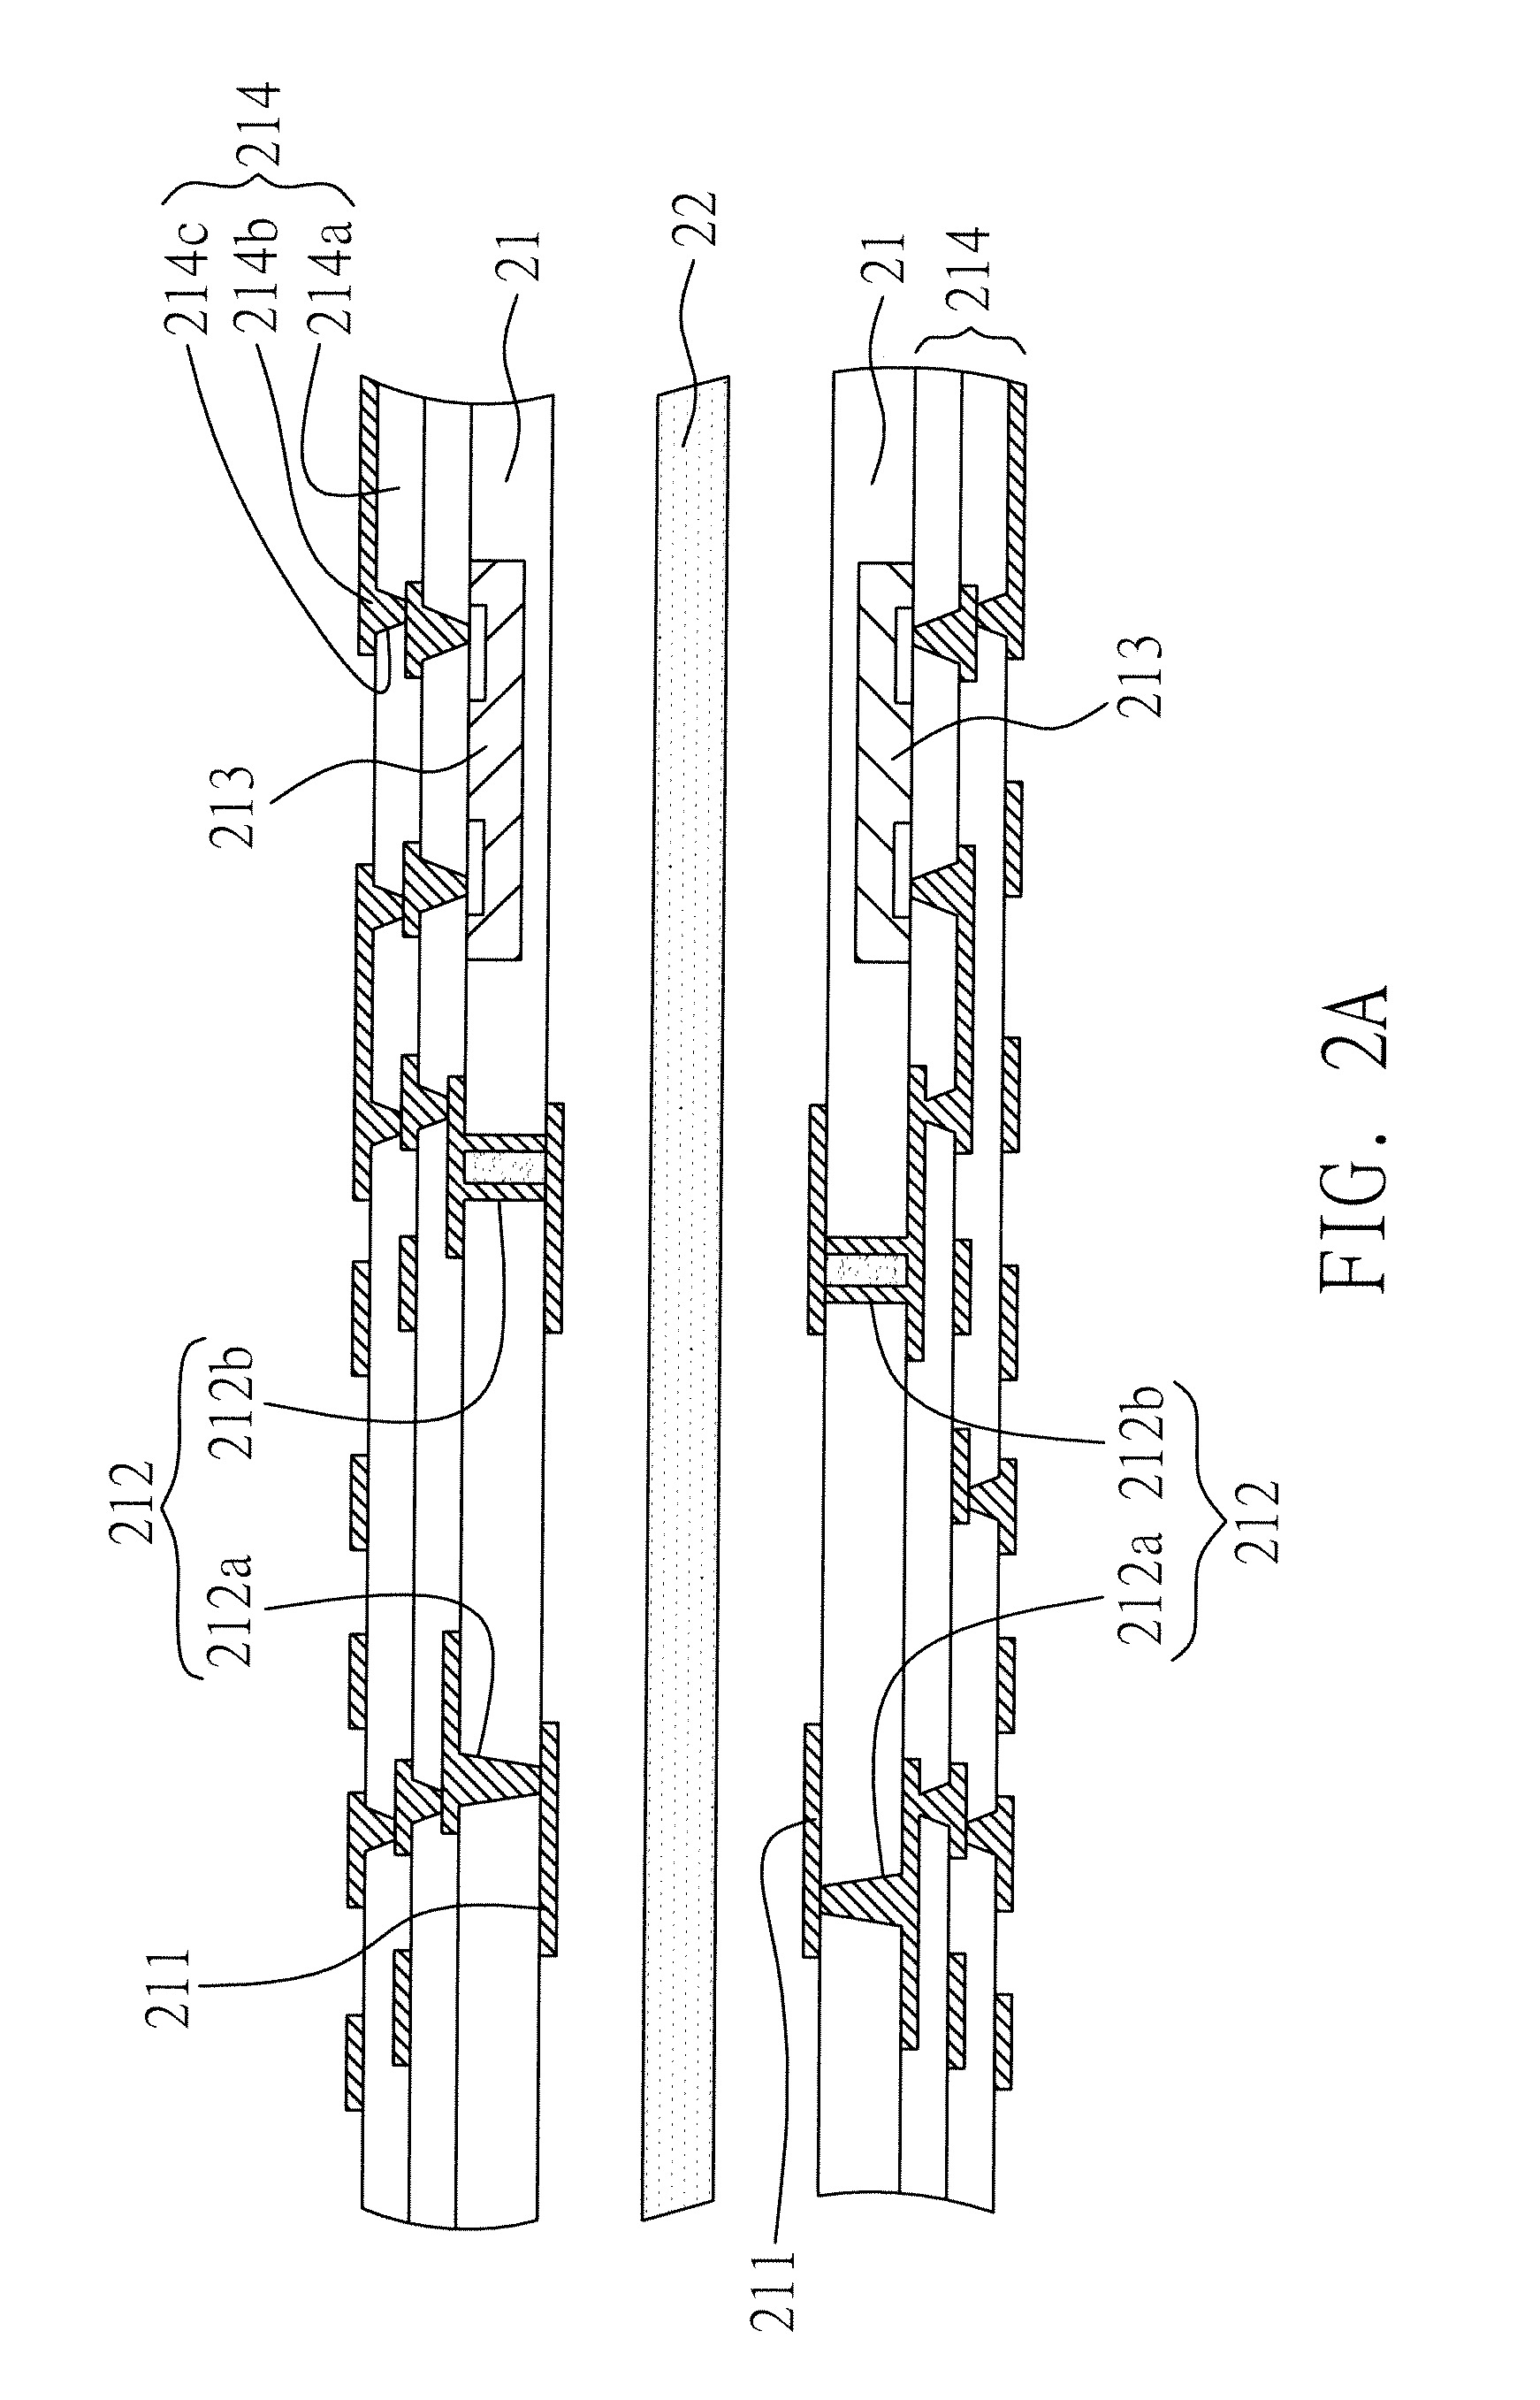 Circuit Board Structure Having Capacitor Array and Embedded Electronic Component and Method for Fabricating the Same